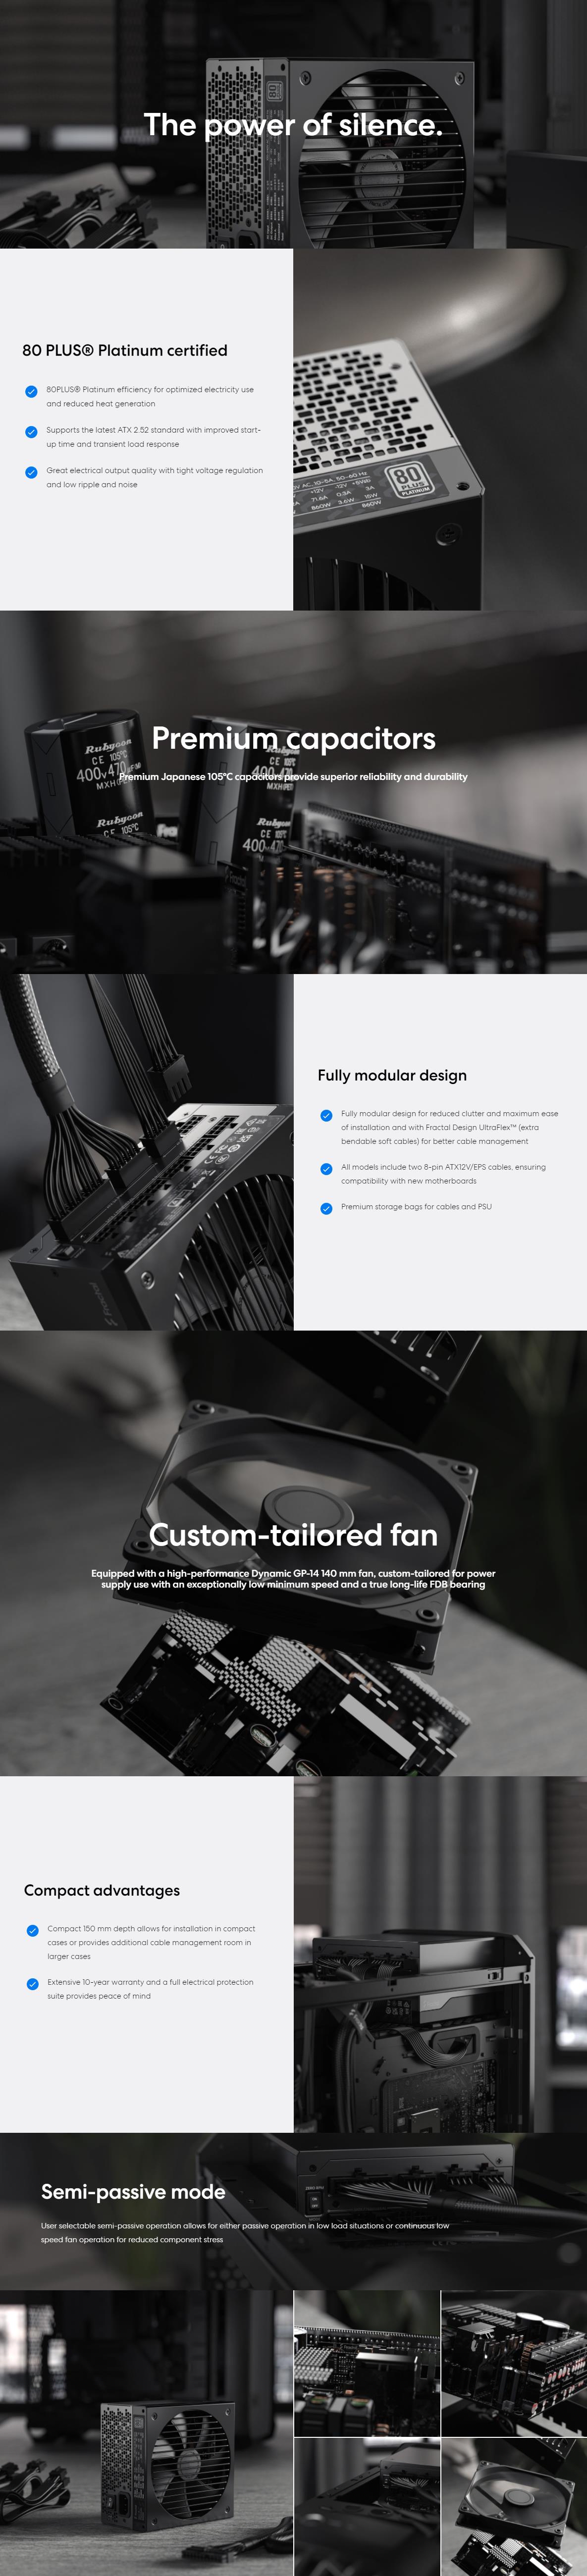 A large marketing image providing additional information about the product Fractal Design Ion+ 2 760W Platinum ATX Modular PSU - Additional alt info not provided